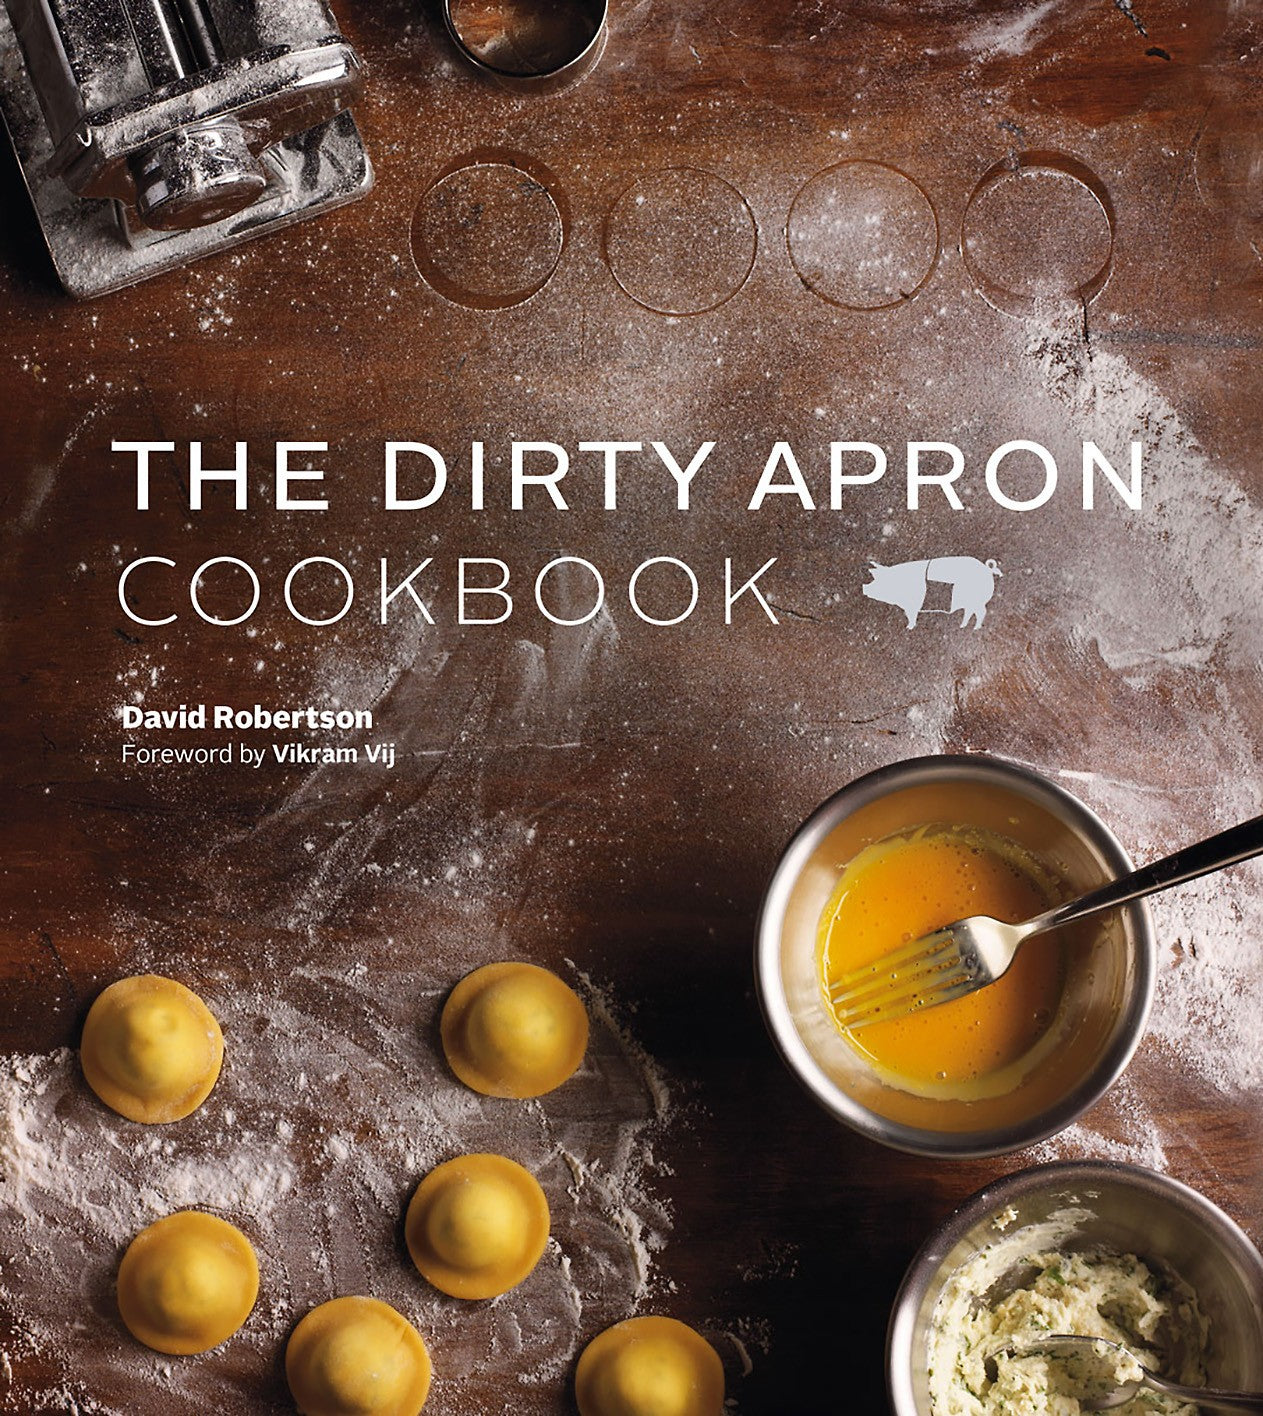 Dirty Apron Cookbook, The